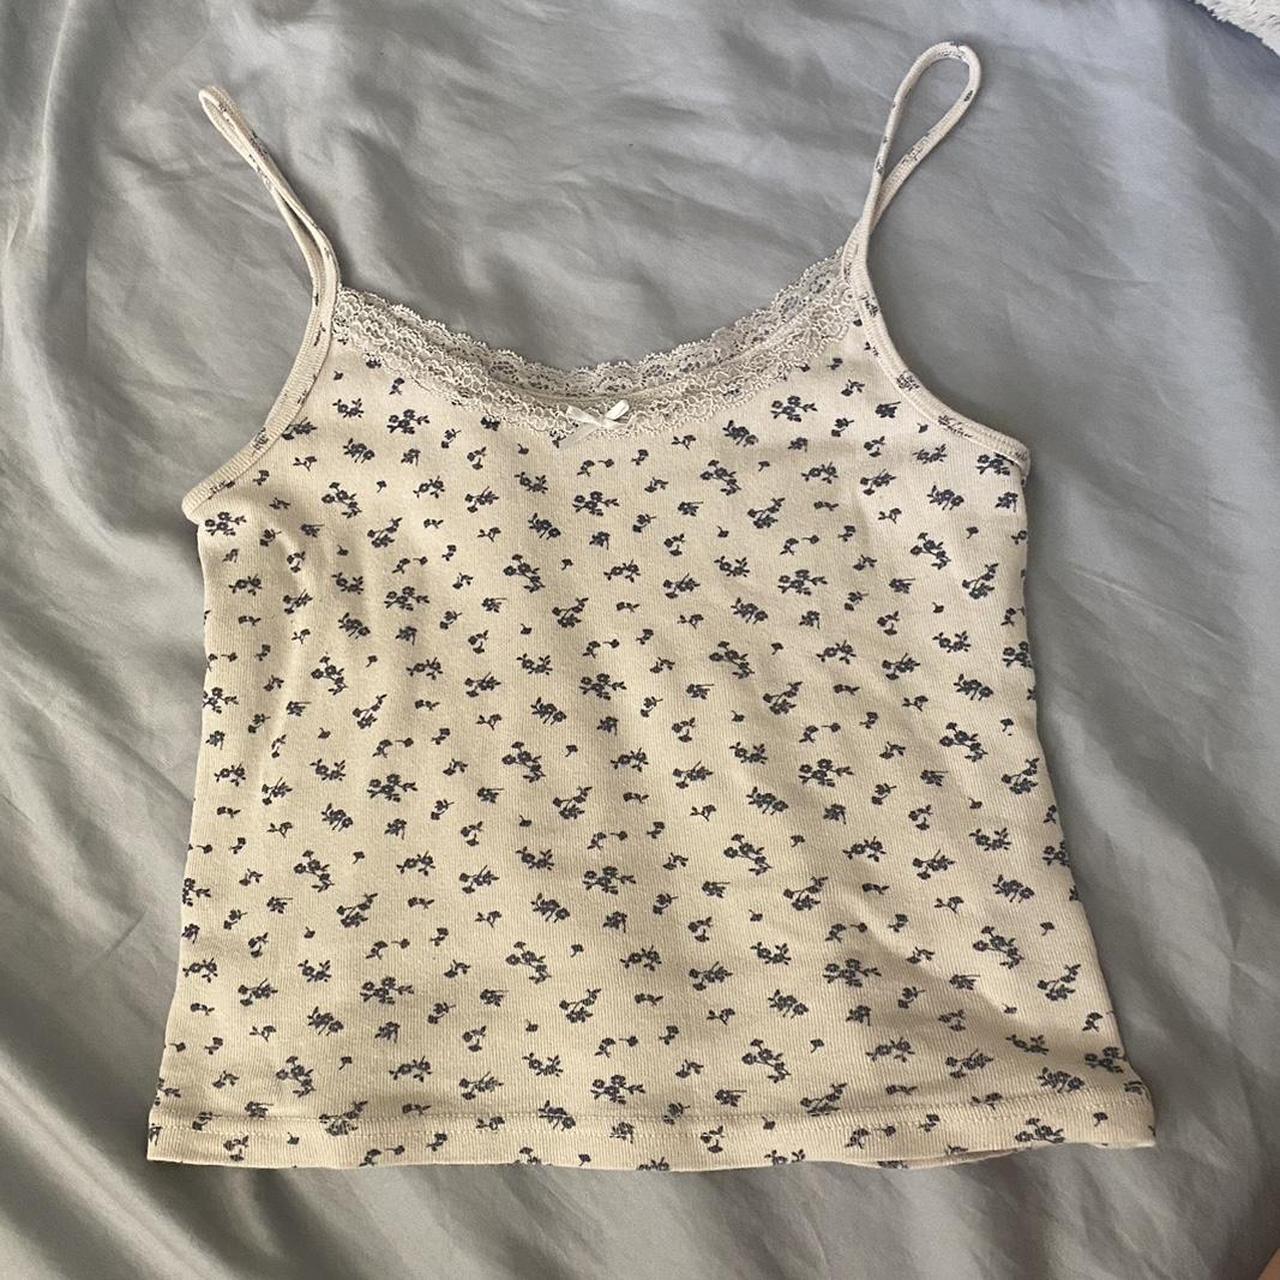 Tiffany Tank Brandy Melville  Casual outfits, Cute outfits